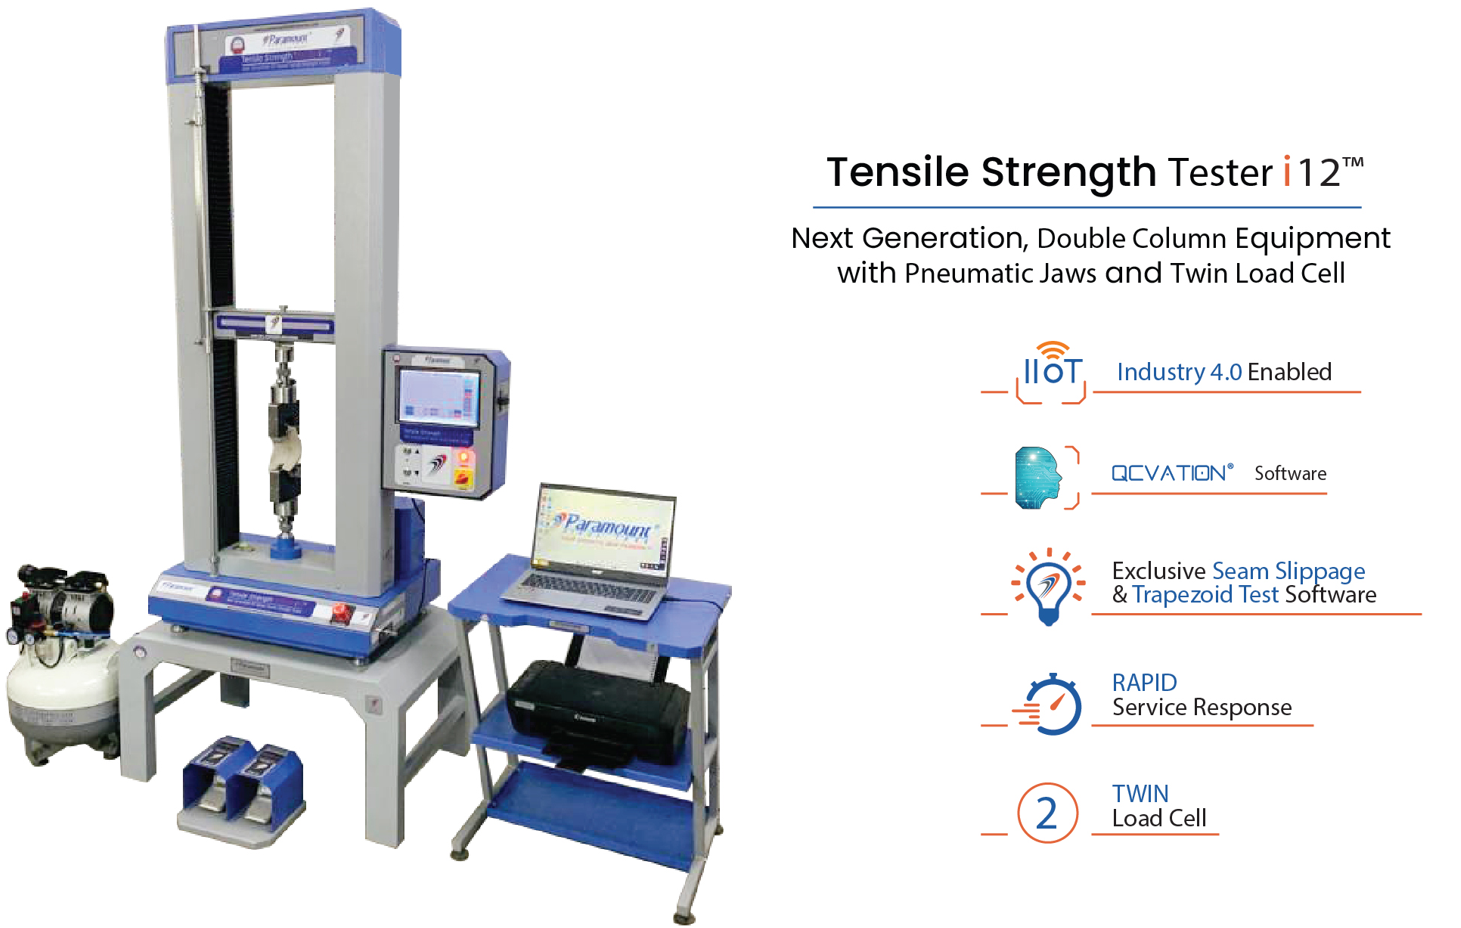 Tensile Strength Testeri12™

 

Next Generation, Double Column Equipment
with Pneumatic Jaws and Twin Load Cell

0))

0

E
SG

NN ”
- ~

ul

?
®

Industry 4.0 Enabled

QCVATION® Software

Exclusive Seam slippage
&amp; Trapezoid Test Software

RAPID
Service Response

TWIN

Load Cell